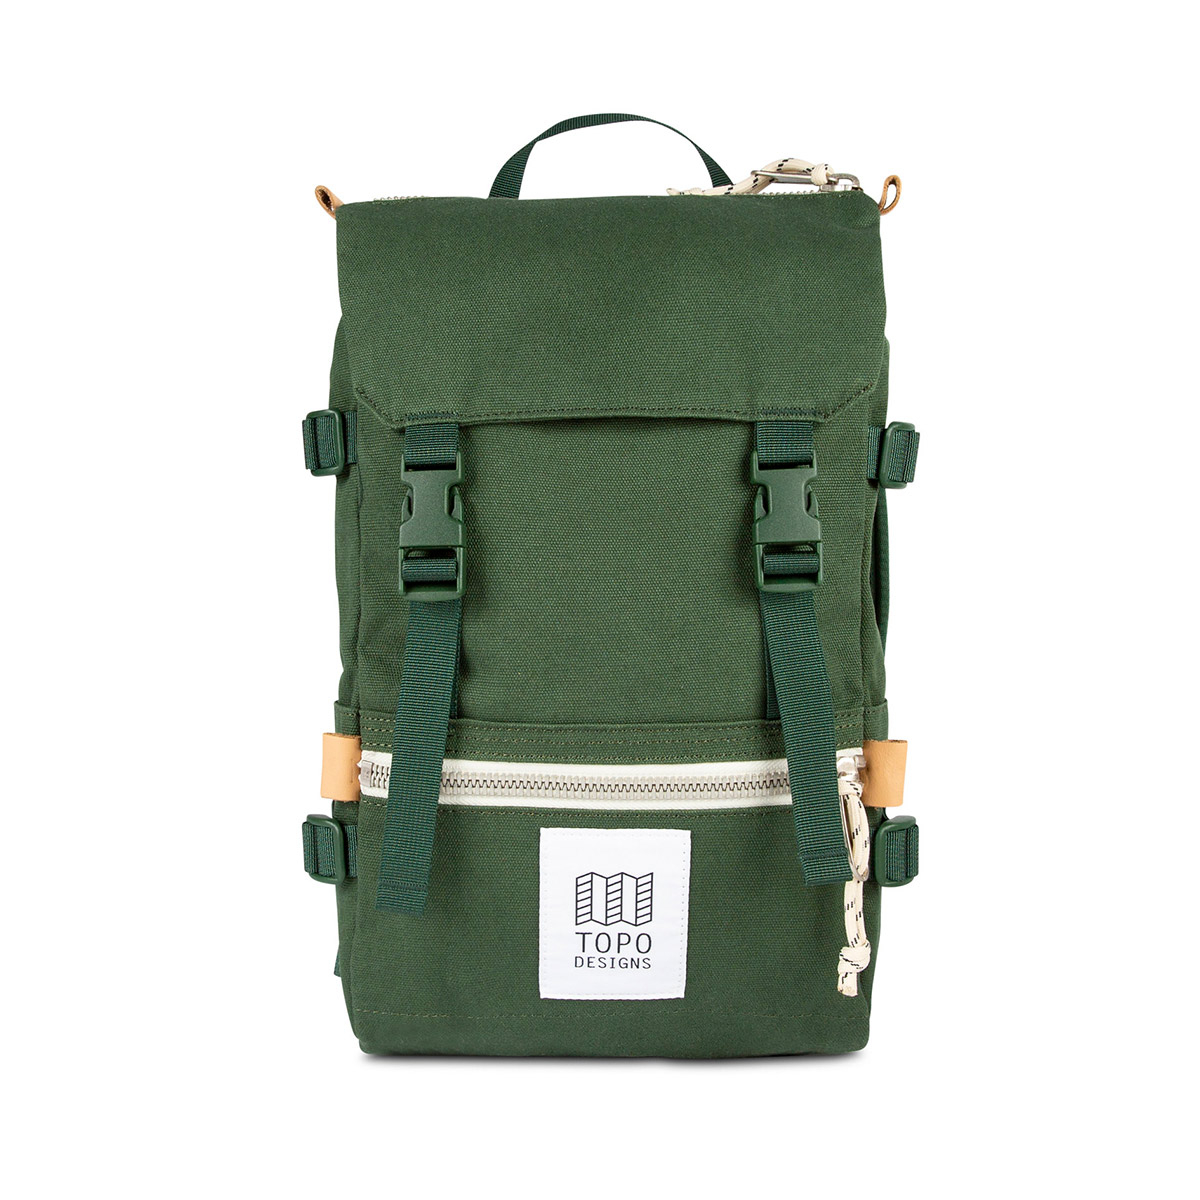 Topo Designs Rover Pack - Mini Canvas Forest, statement-making bag that’s the perfect size for errands around town or on the trail